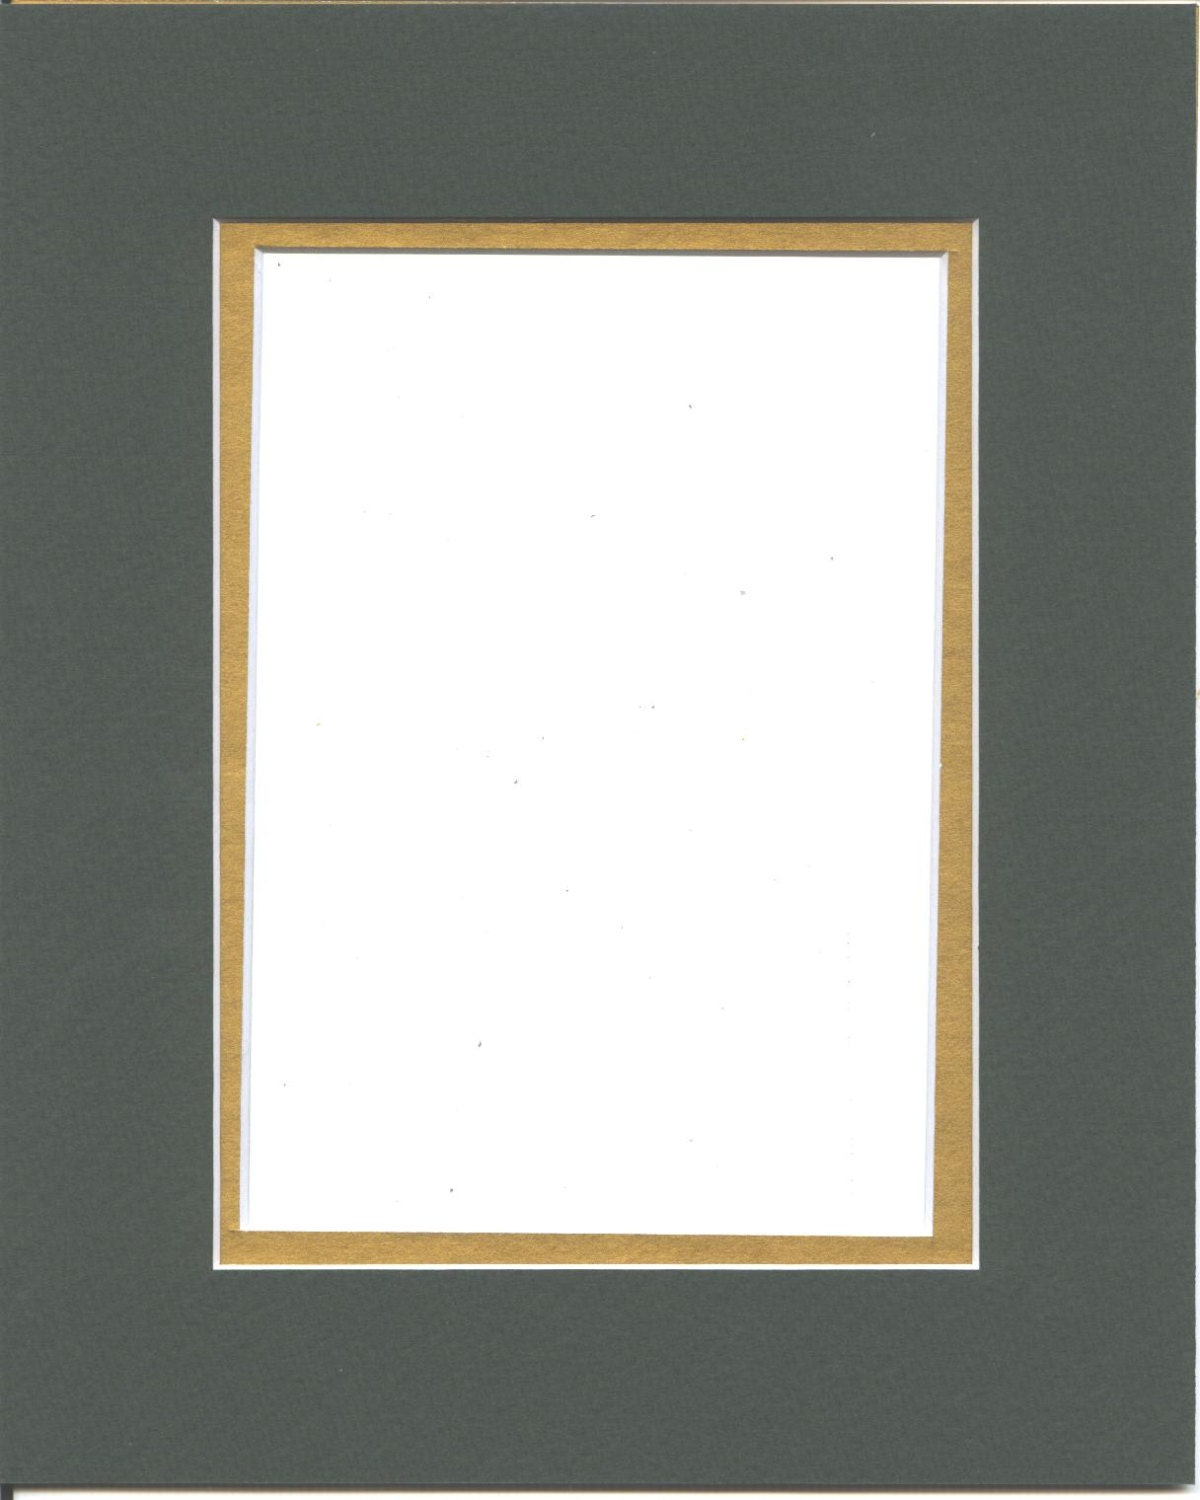 5x7 Mat for 8x10 Frame - Precut Mat Board Acid-Free Textured Cream 5x7 Photo Matte for A 8x10 Picture Frame - Off White